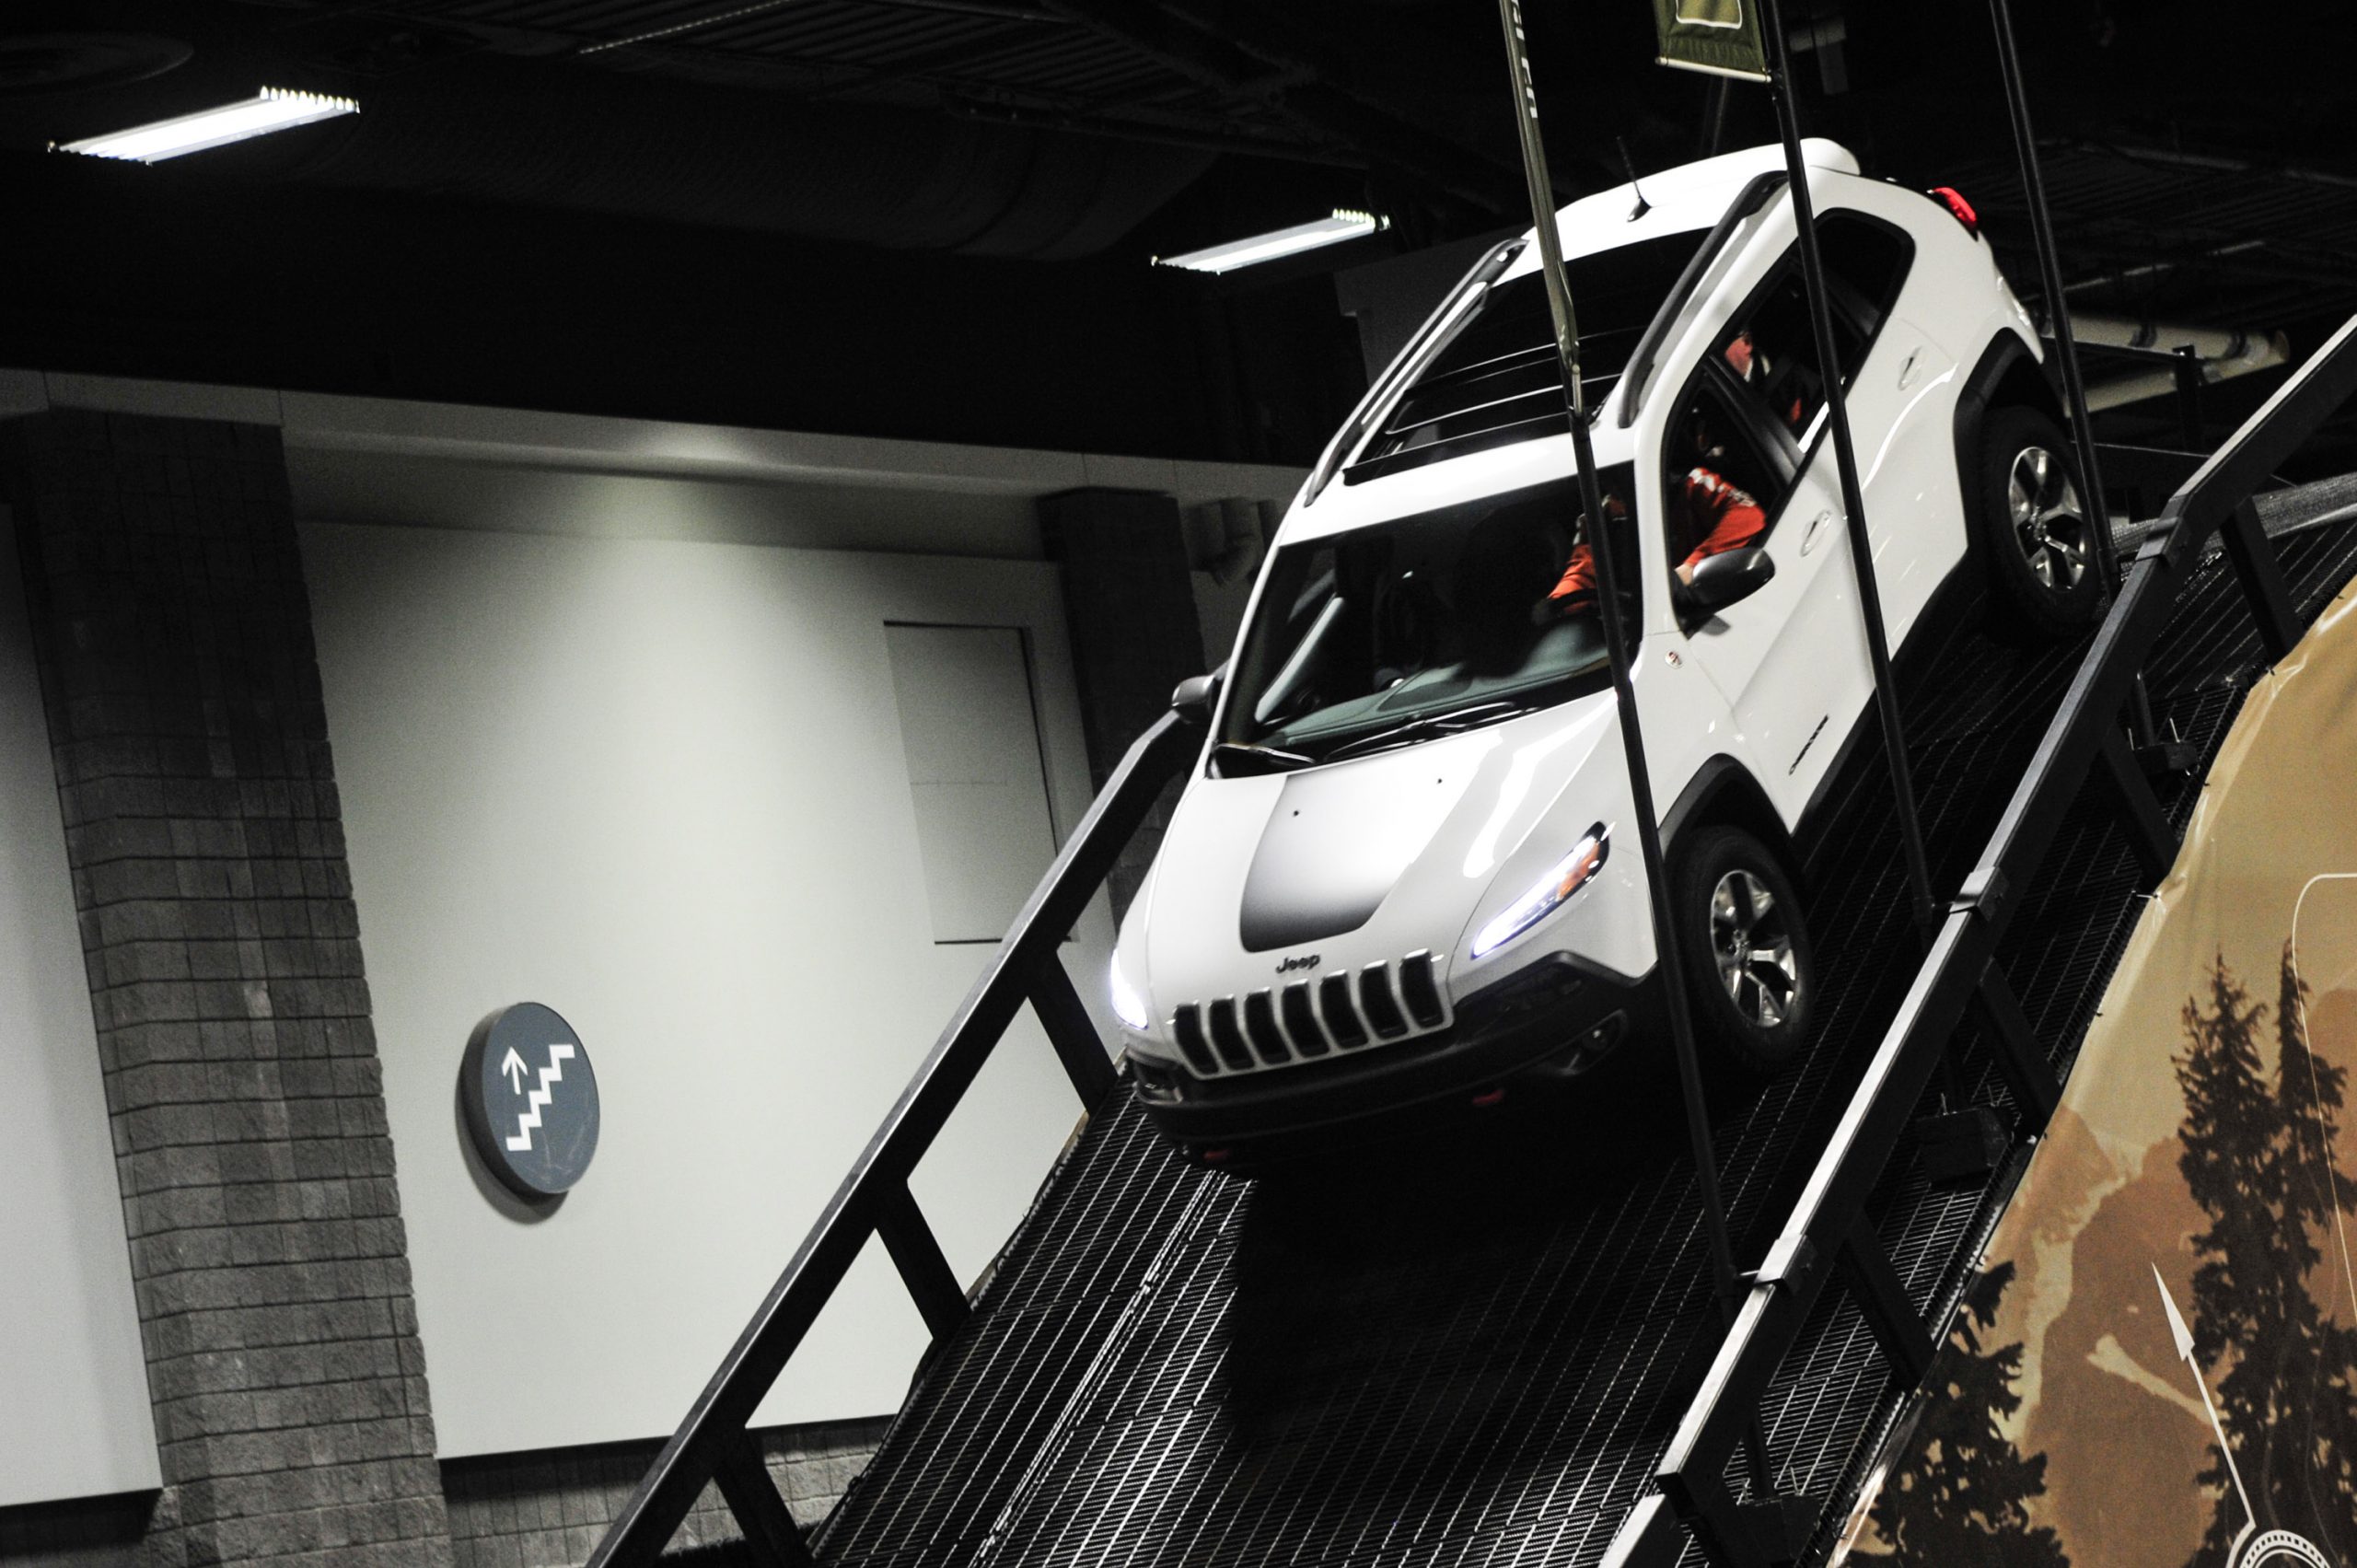 A Jeep Compass on display at an auto show